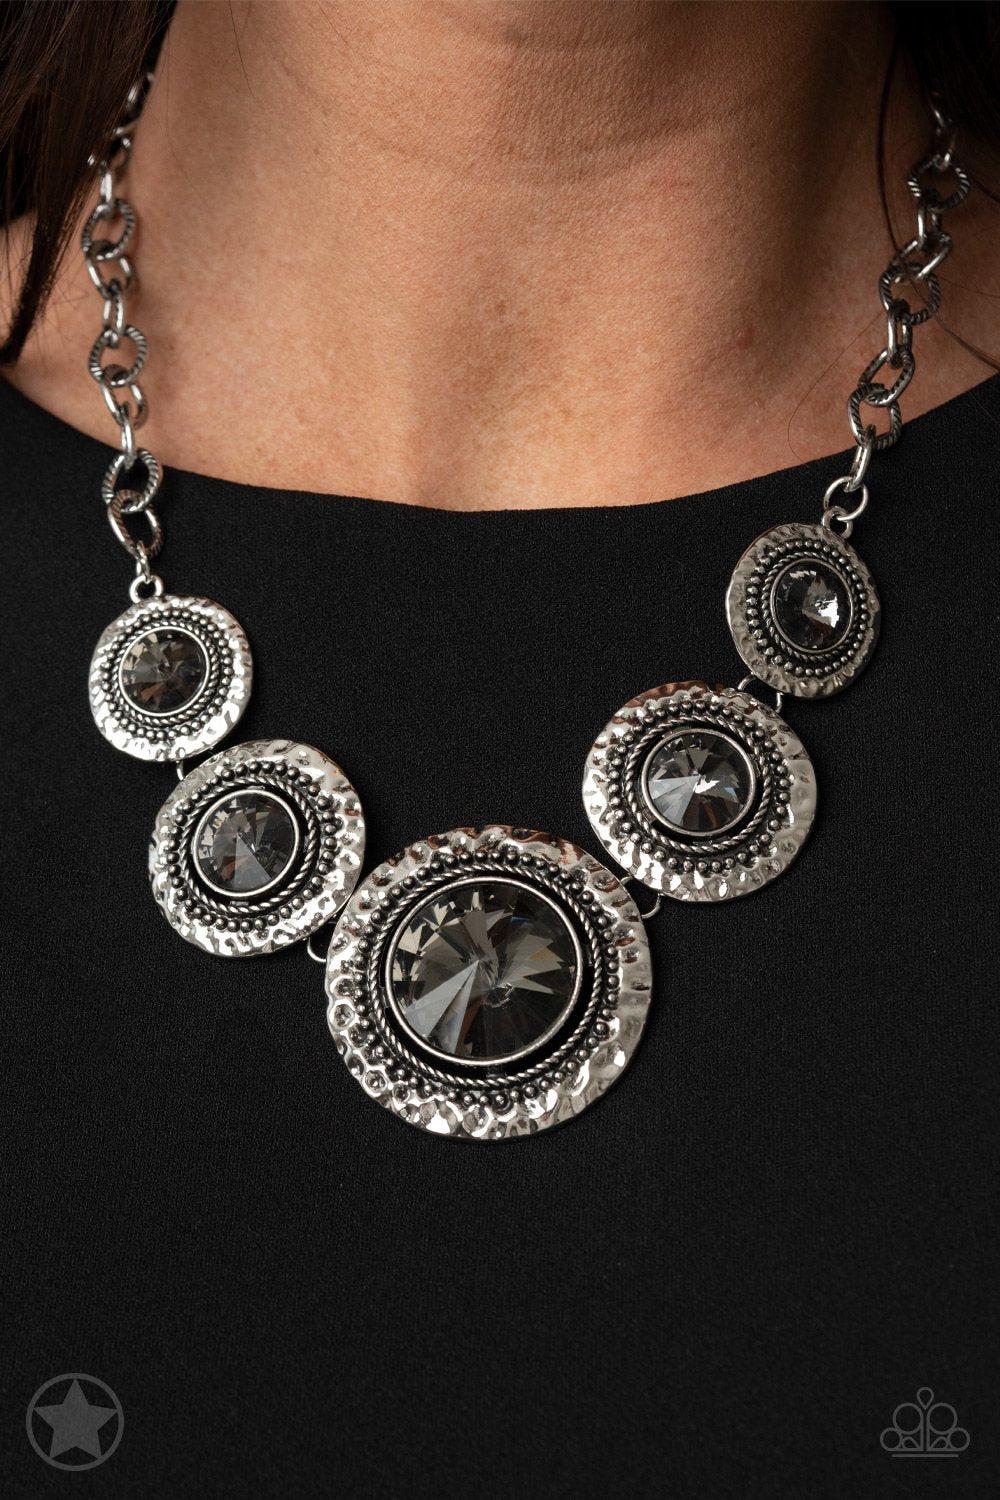 Global Glamour Silver and Smoky Gem Necklace and matching Earrings - Paparazzi Accessories - model -CarasShop.com - $5 Jewelry by Cara Jewels